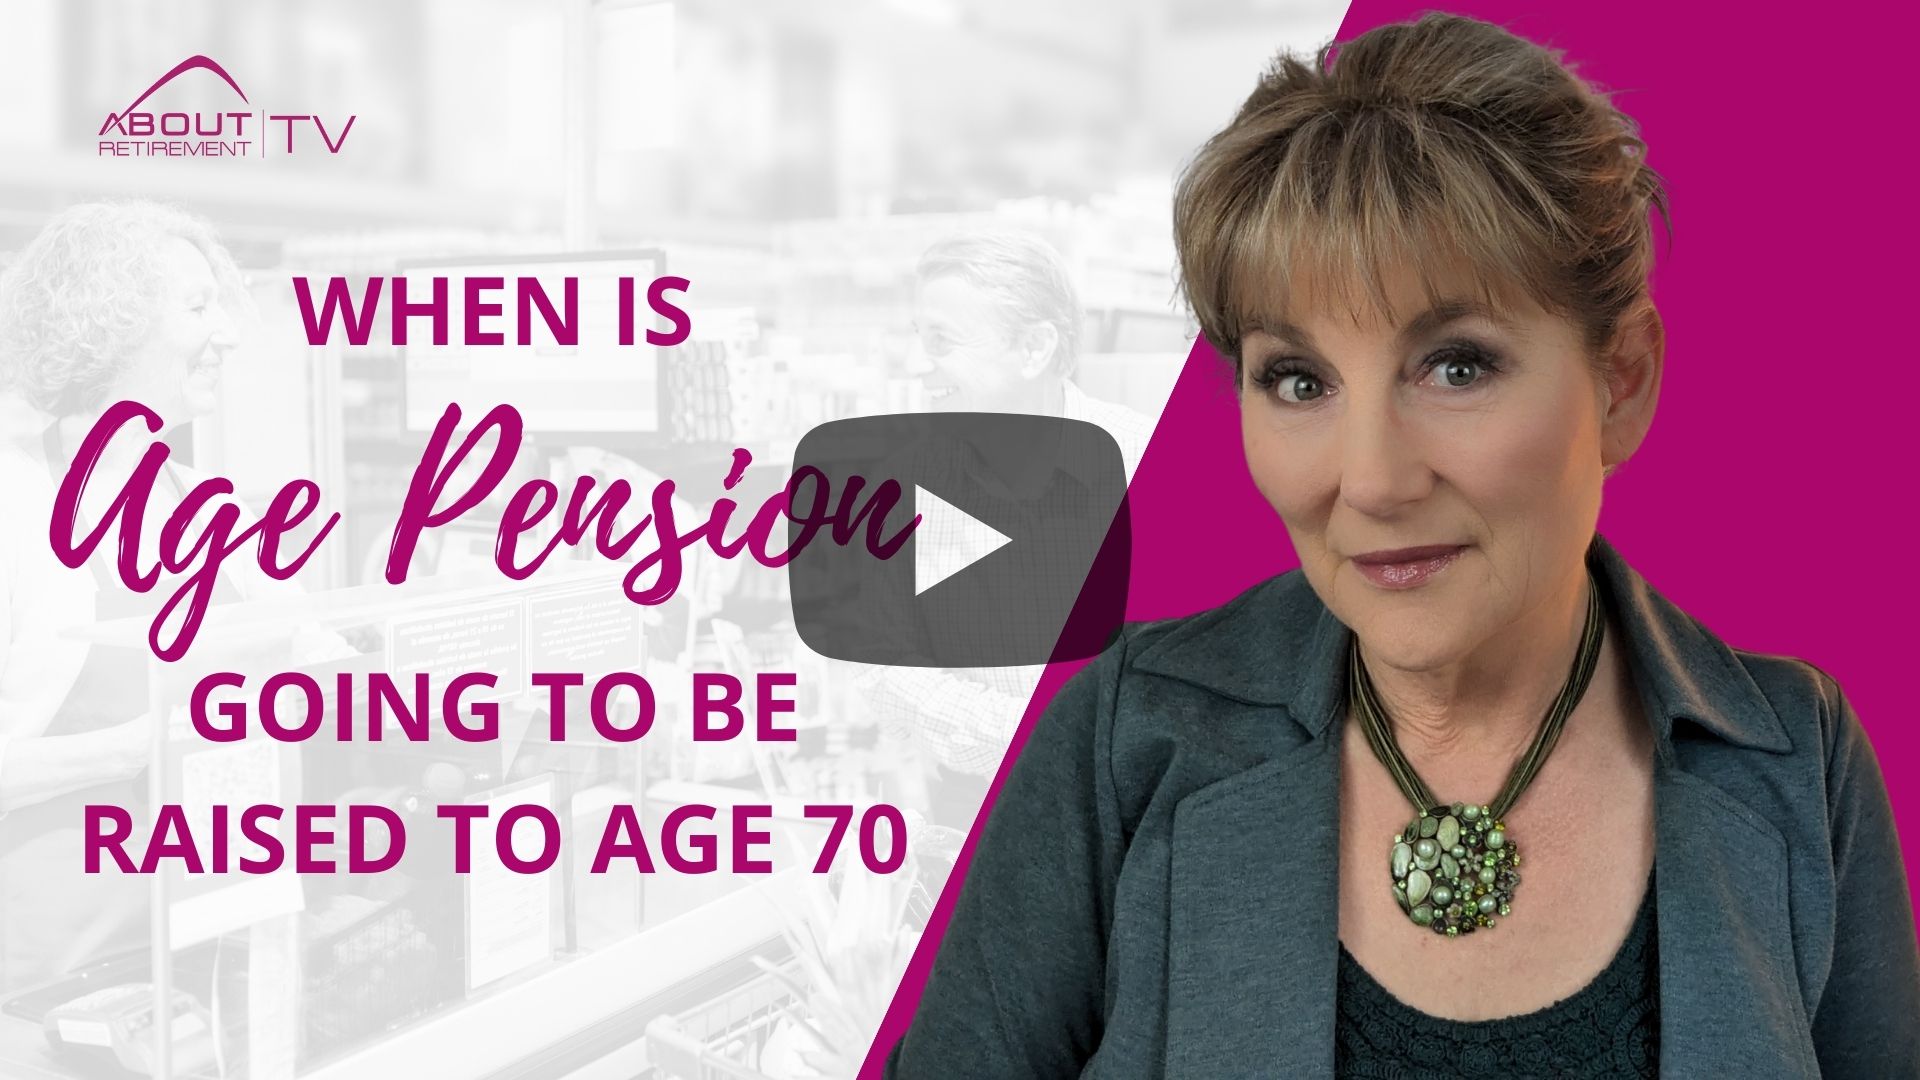 When is Age Pension going to be raised to age 70